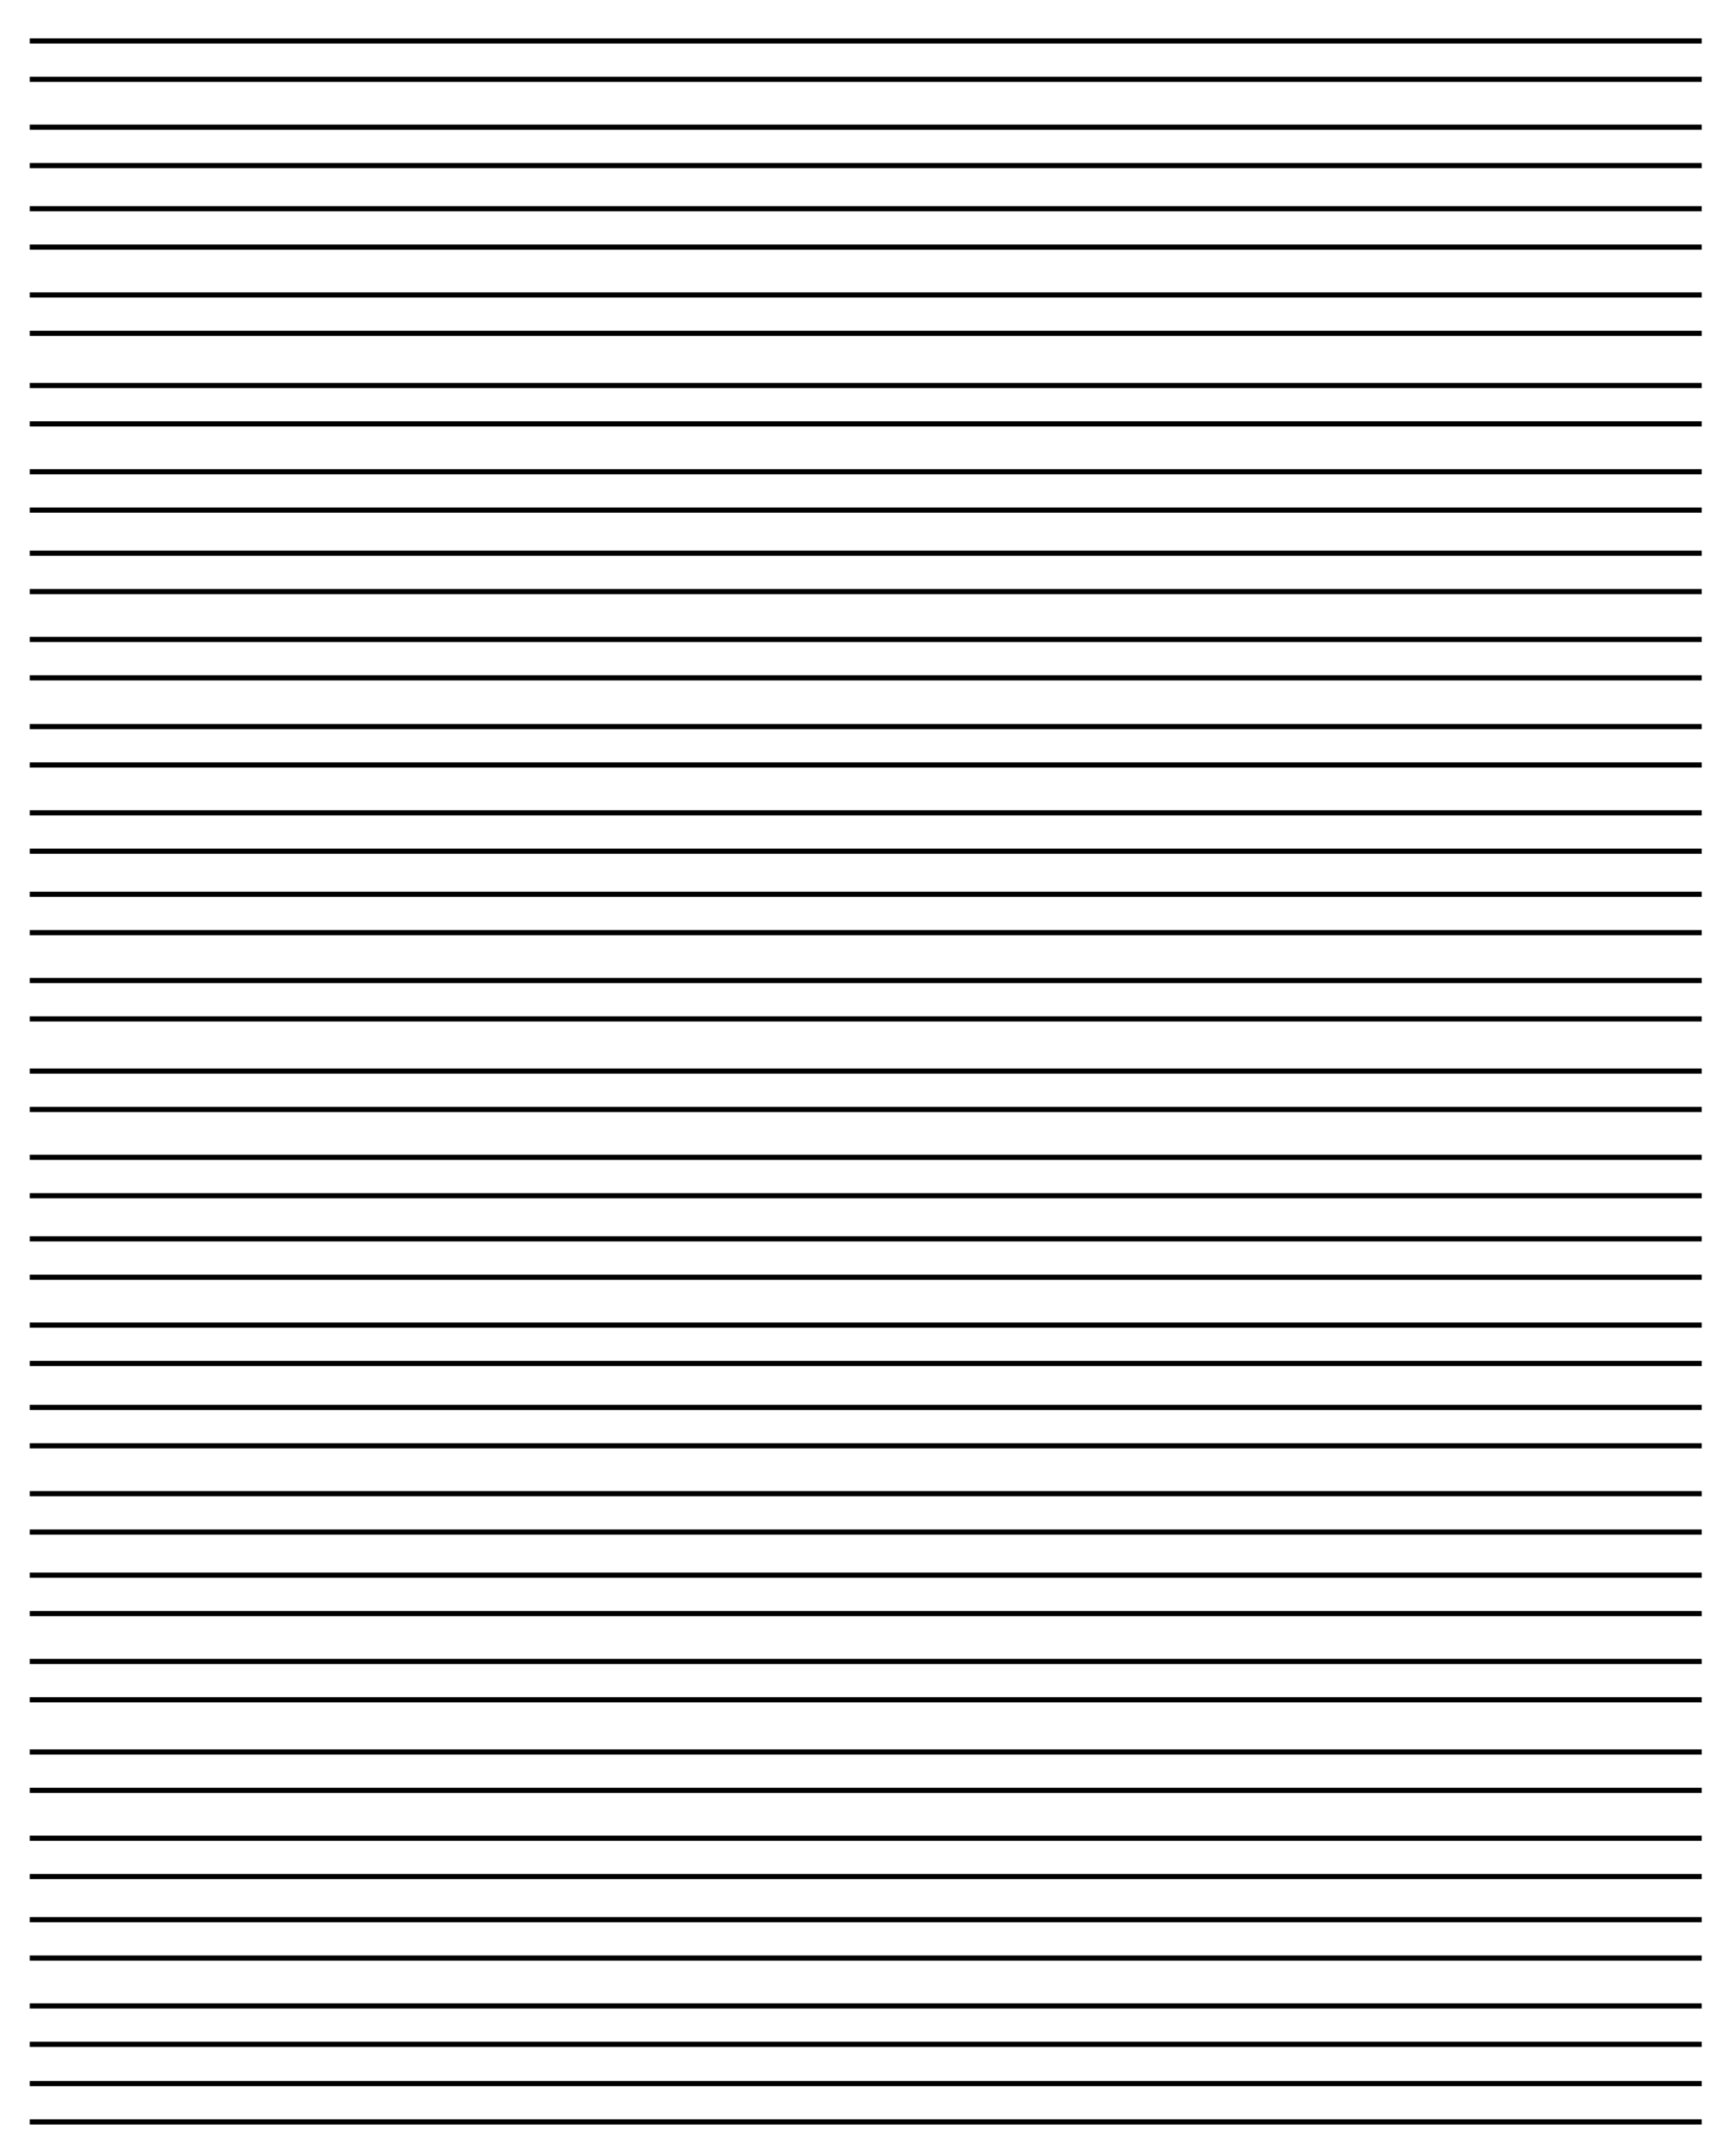 ❤️20+ Free Printable Blank Lined Paper Template In Pdf❤️ Regarding Microsoft Word Lined Paper Template